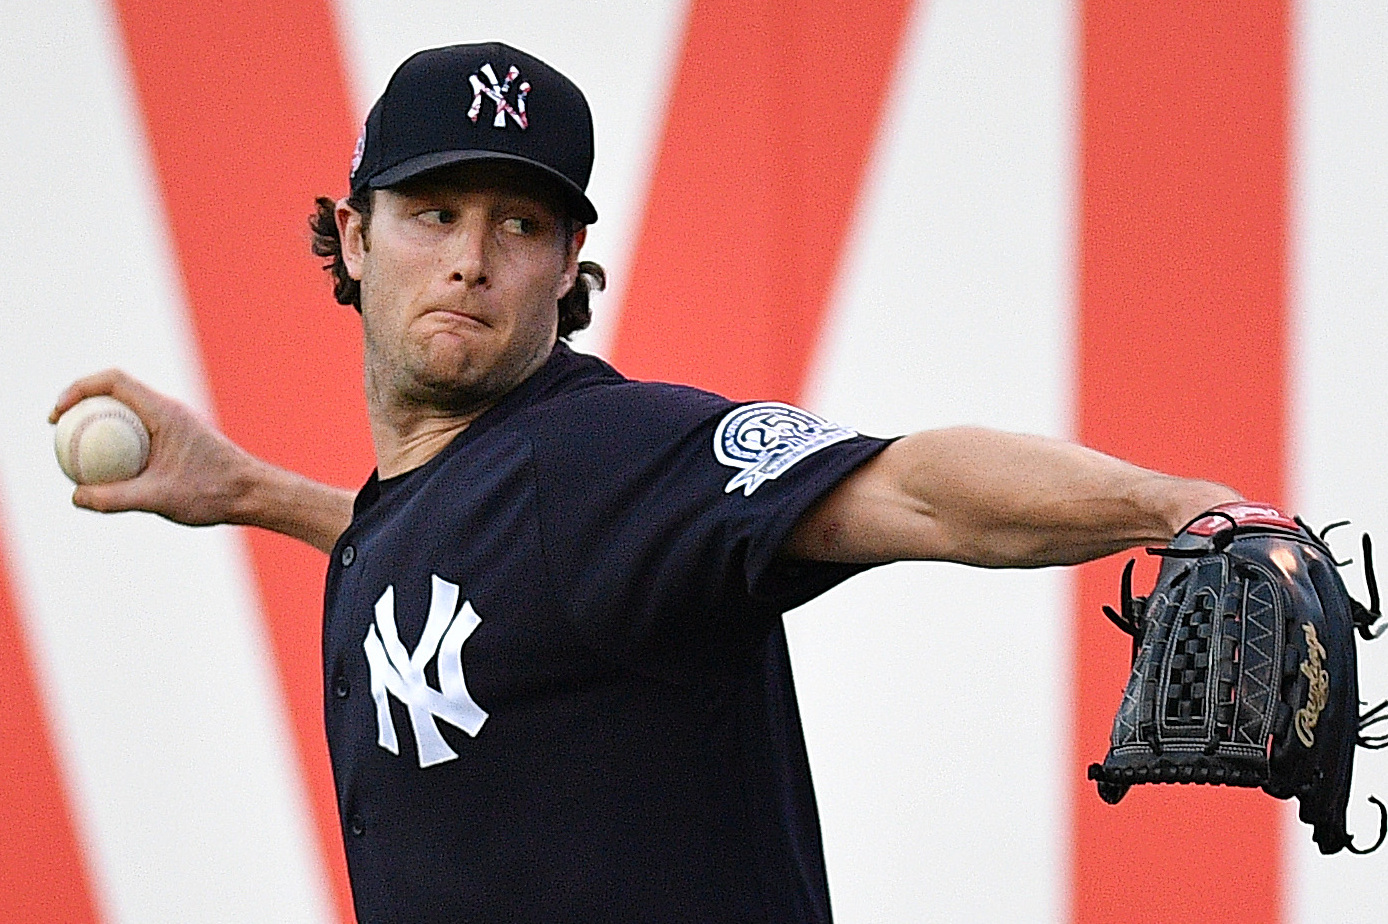 $324 Million Man Gerrit Cole Is Ready to Become Next Yankees